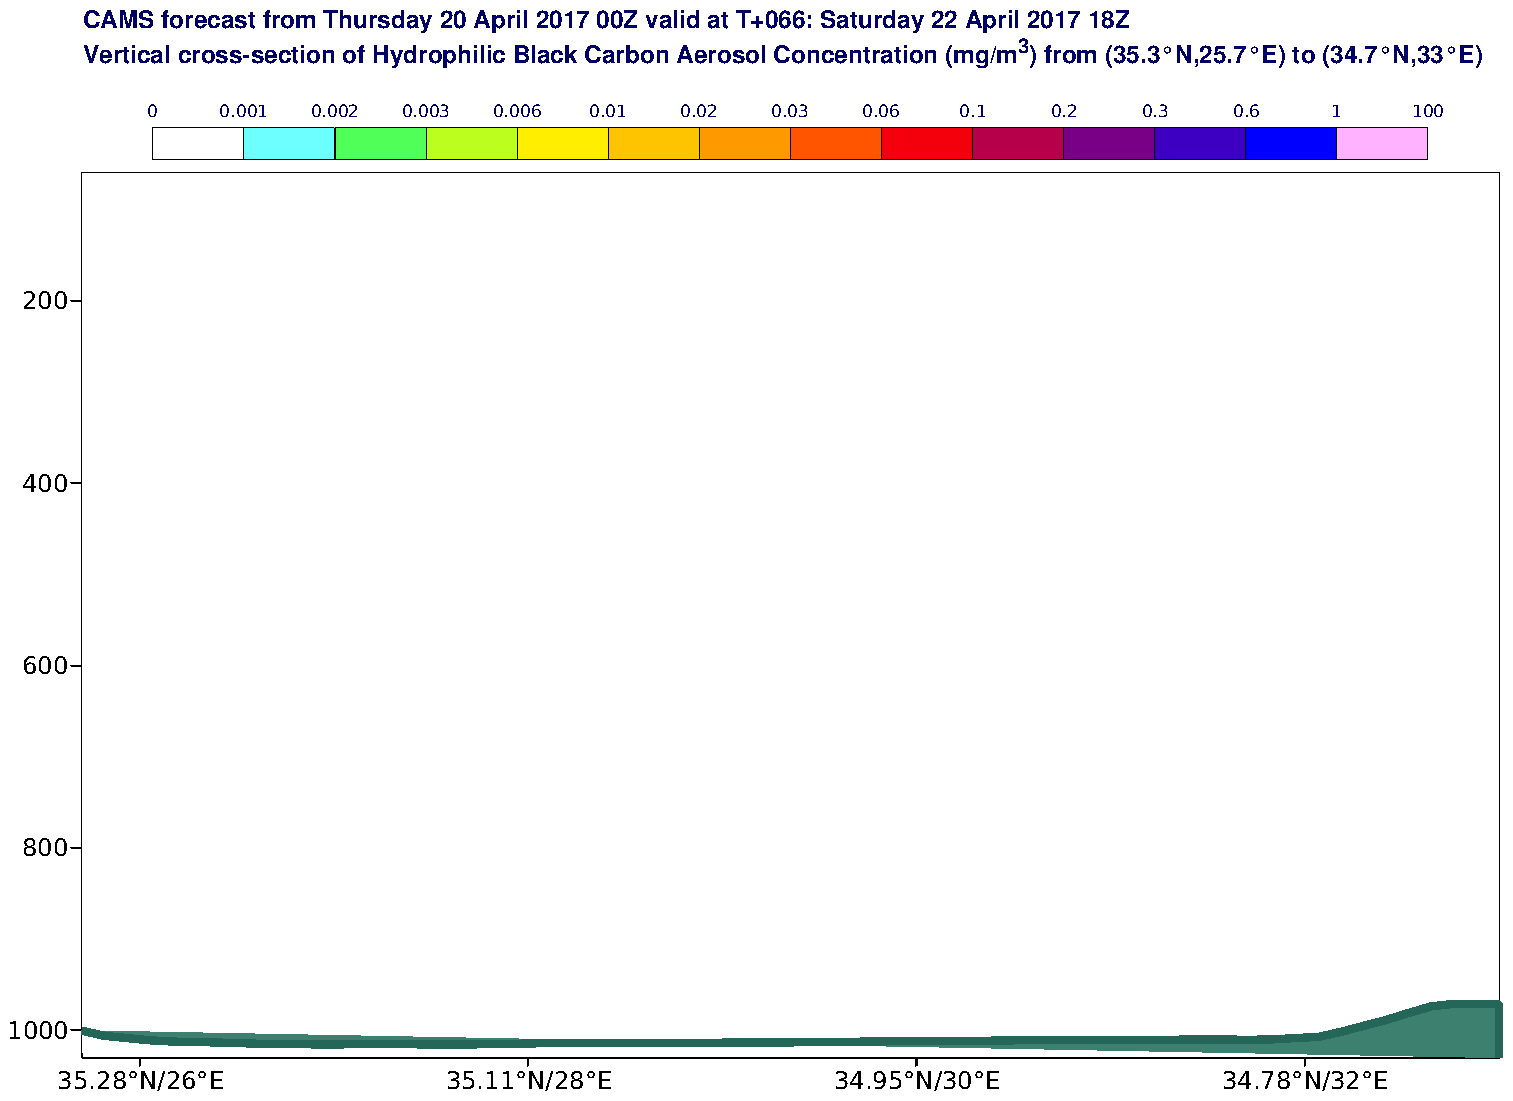 Vertical cross-section of Hydrophilic Black Carbon Aerosol Concentration (mg/m3) valid at T66 - 2017-04-22 18:00